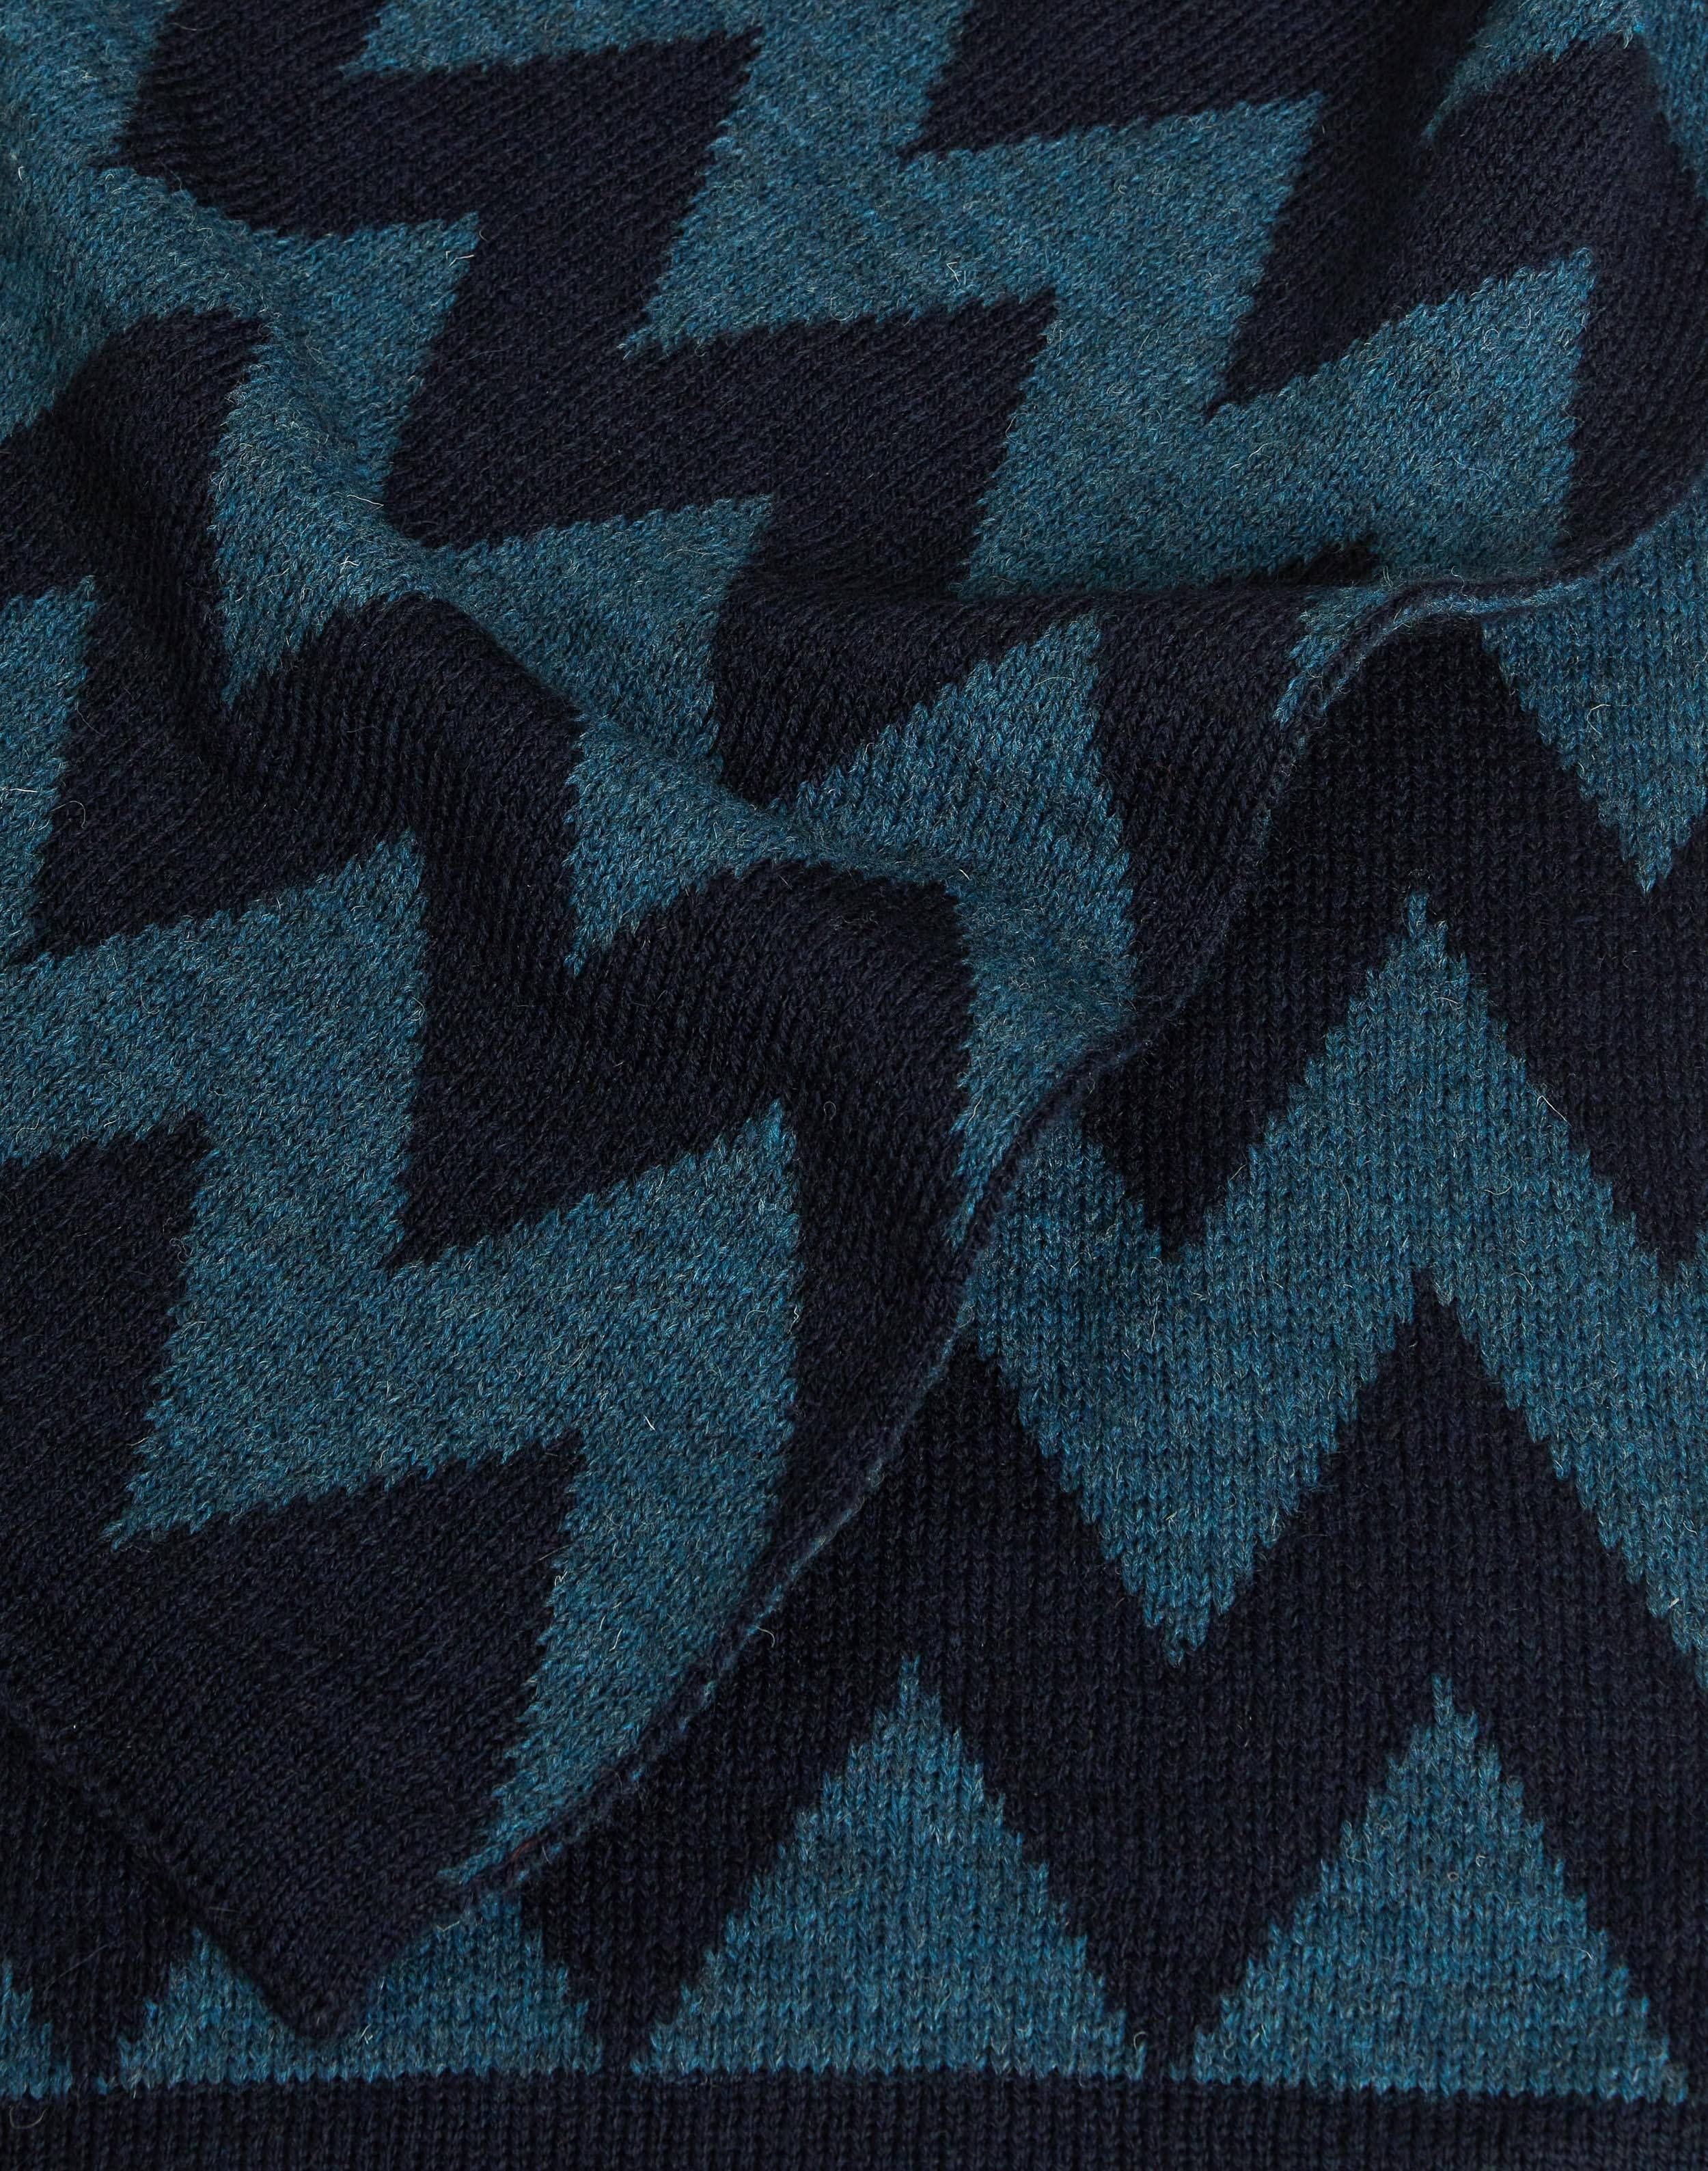 Fishbone-patterned scarf in wool and alpaca